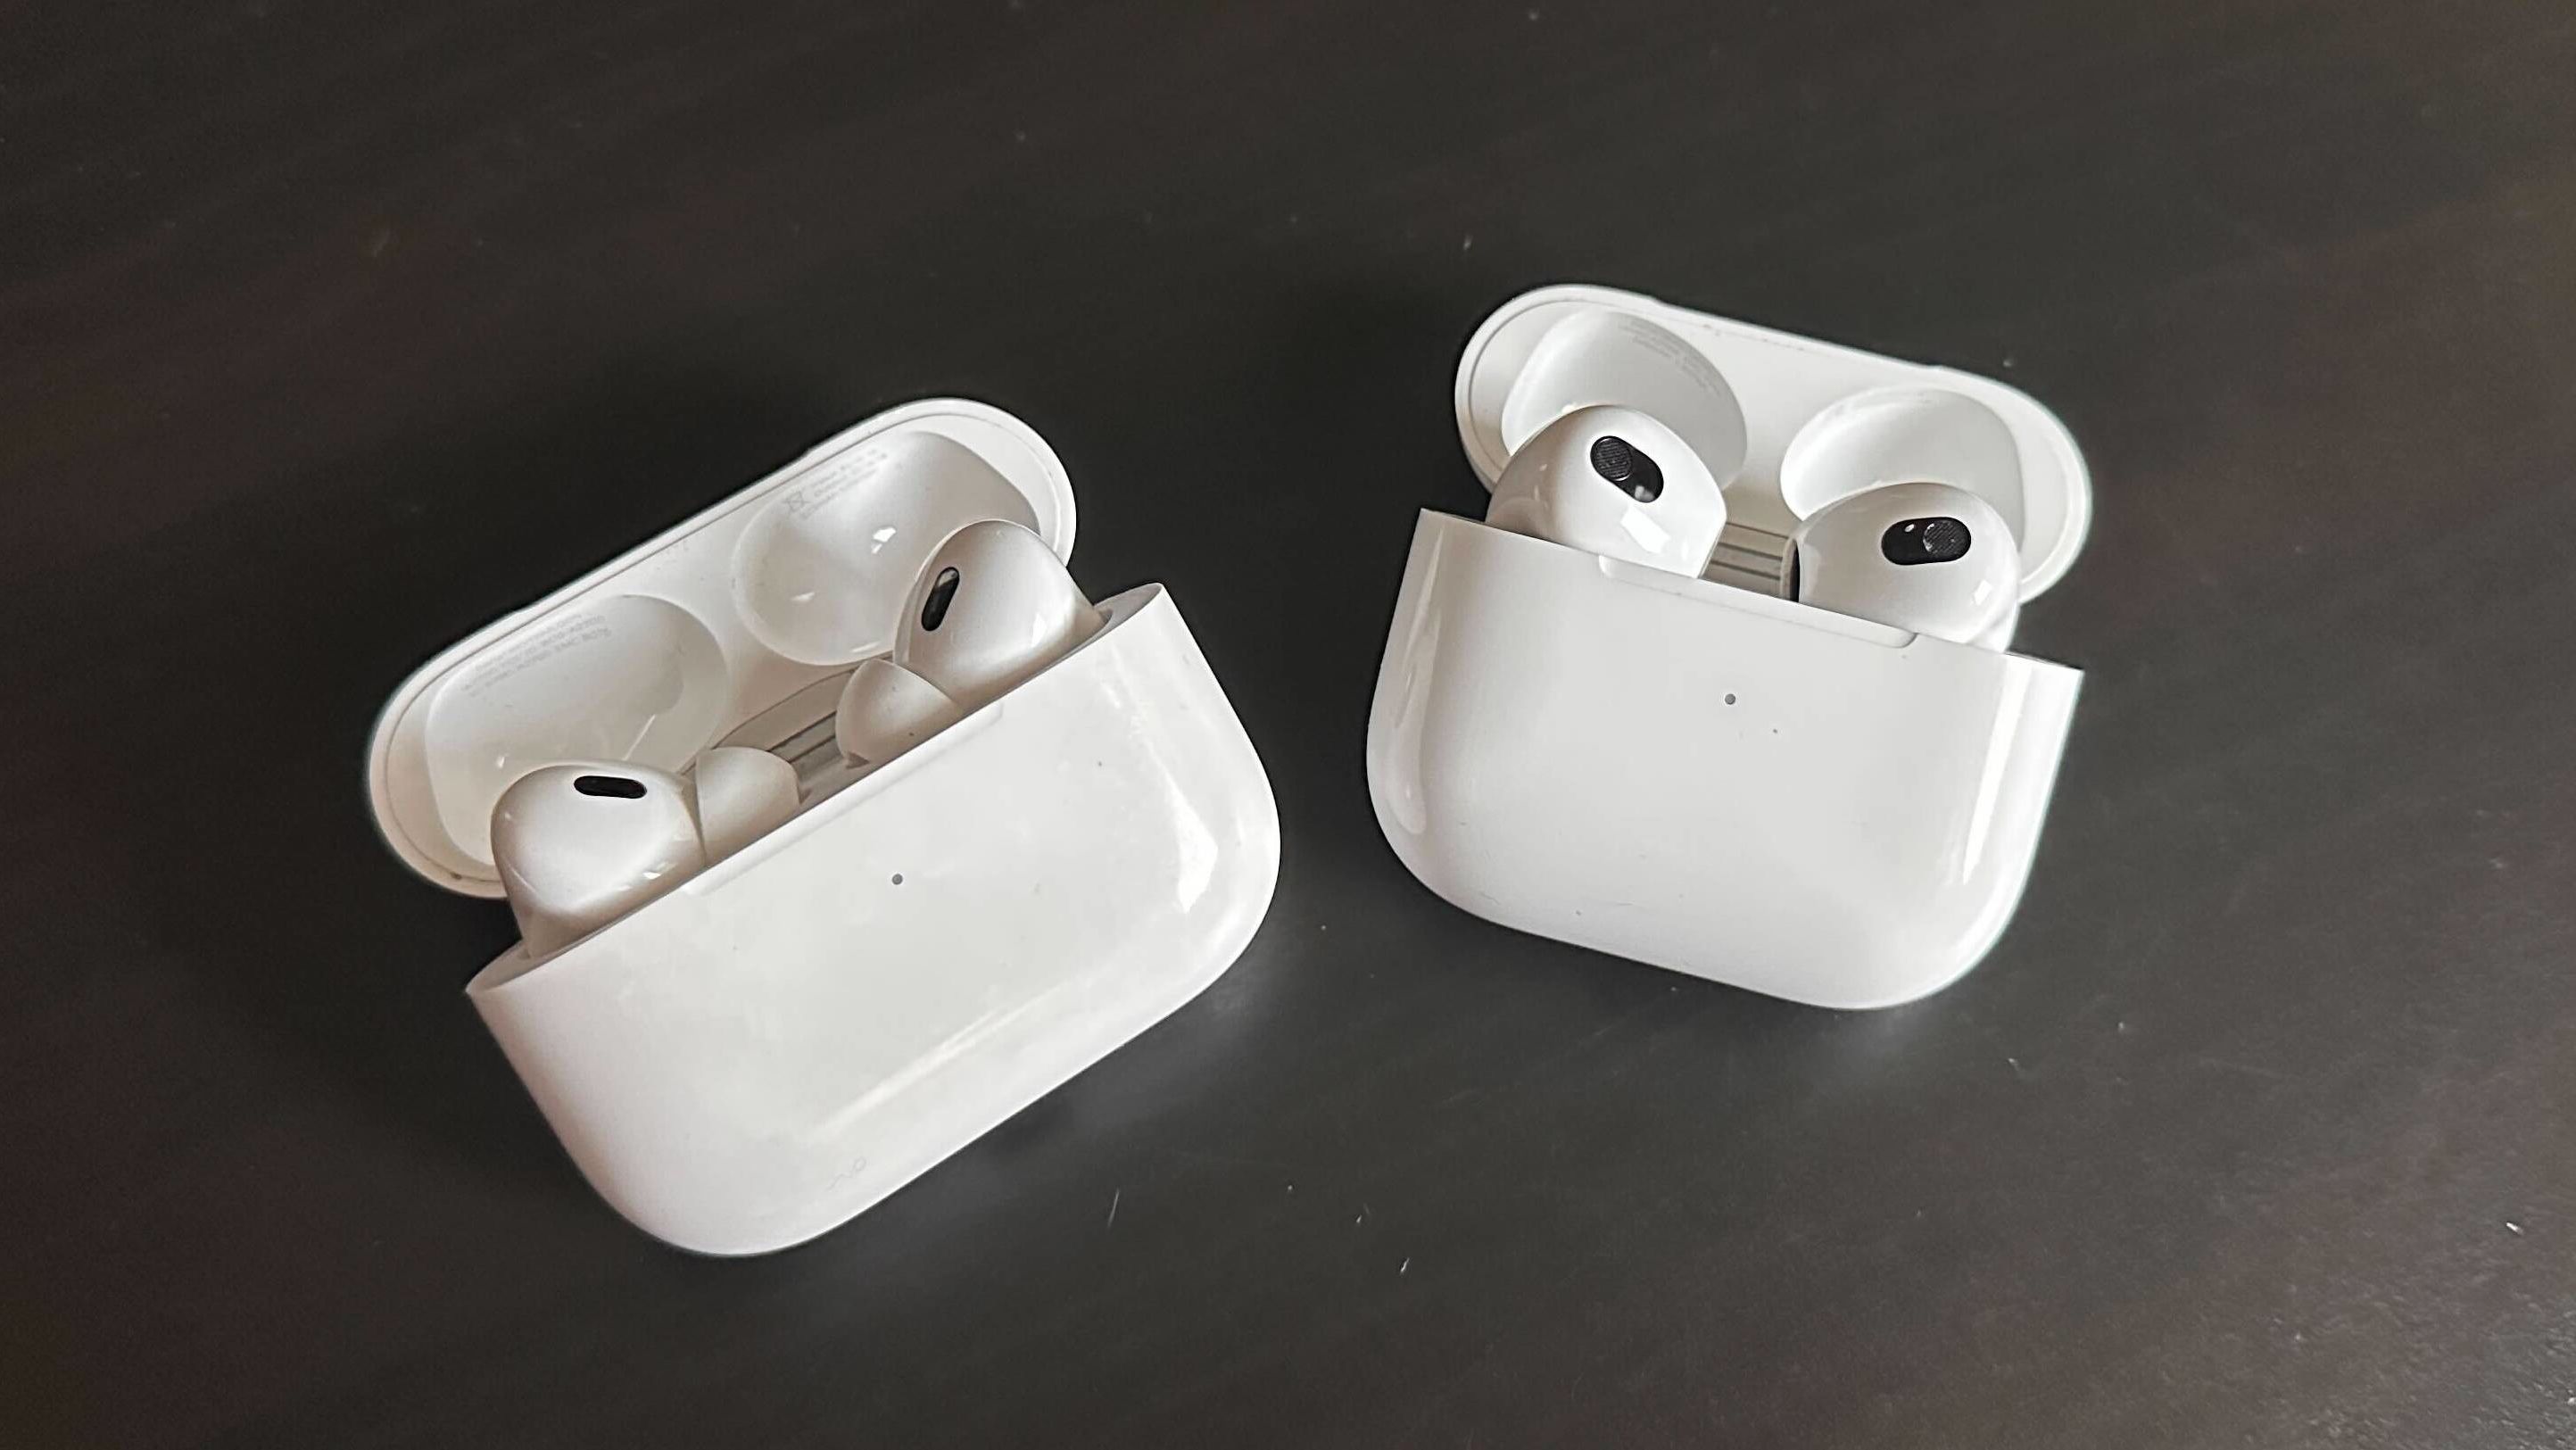 AirPods Pro 2 vs AirPods Pro 1 - Should You Upgrade? 